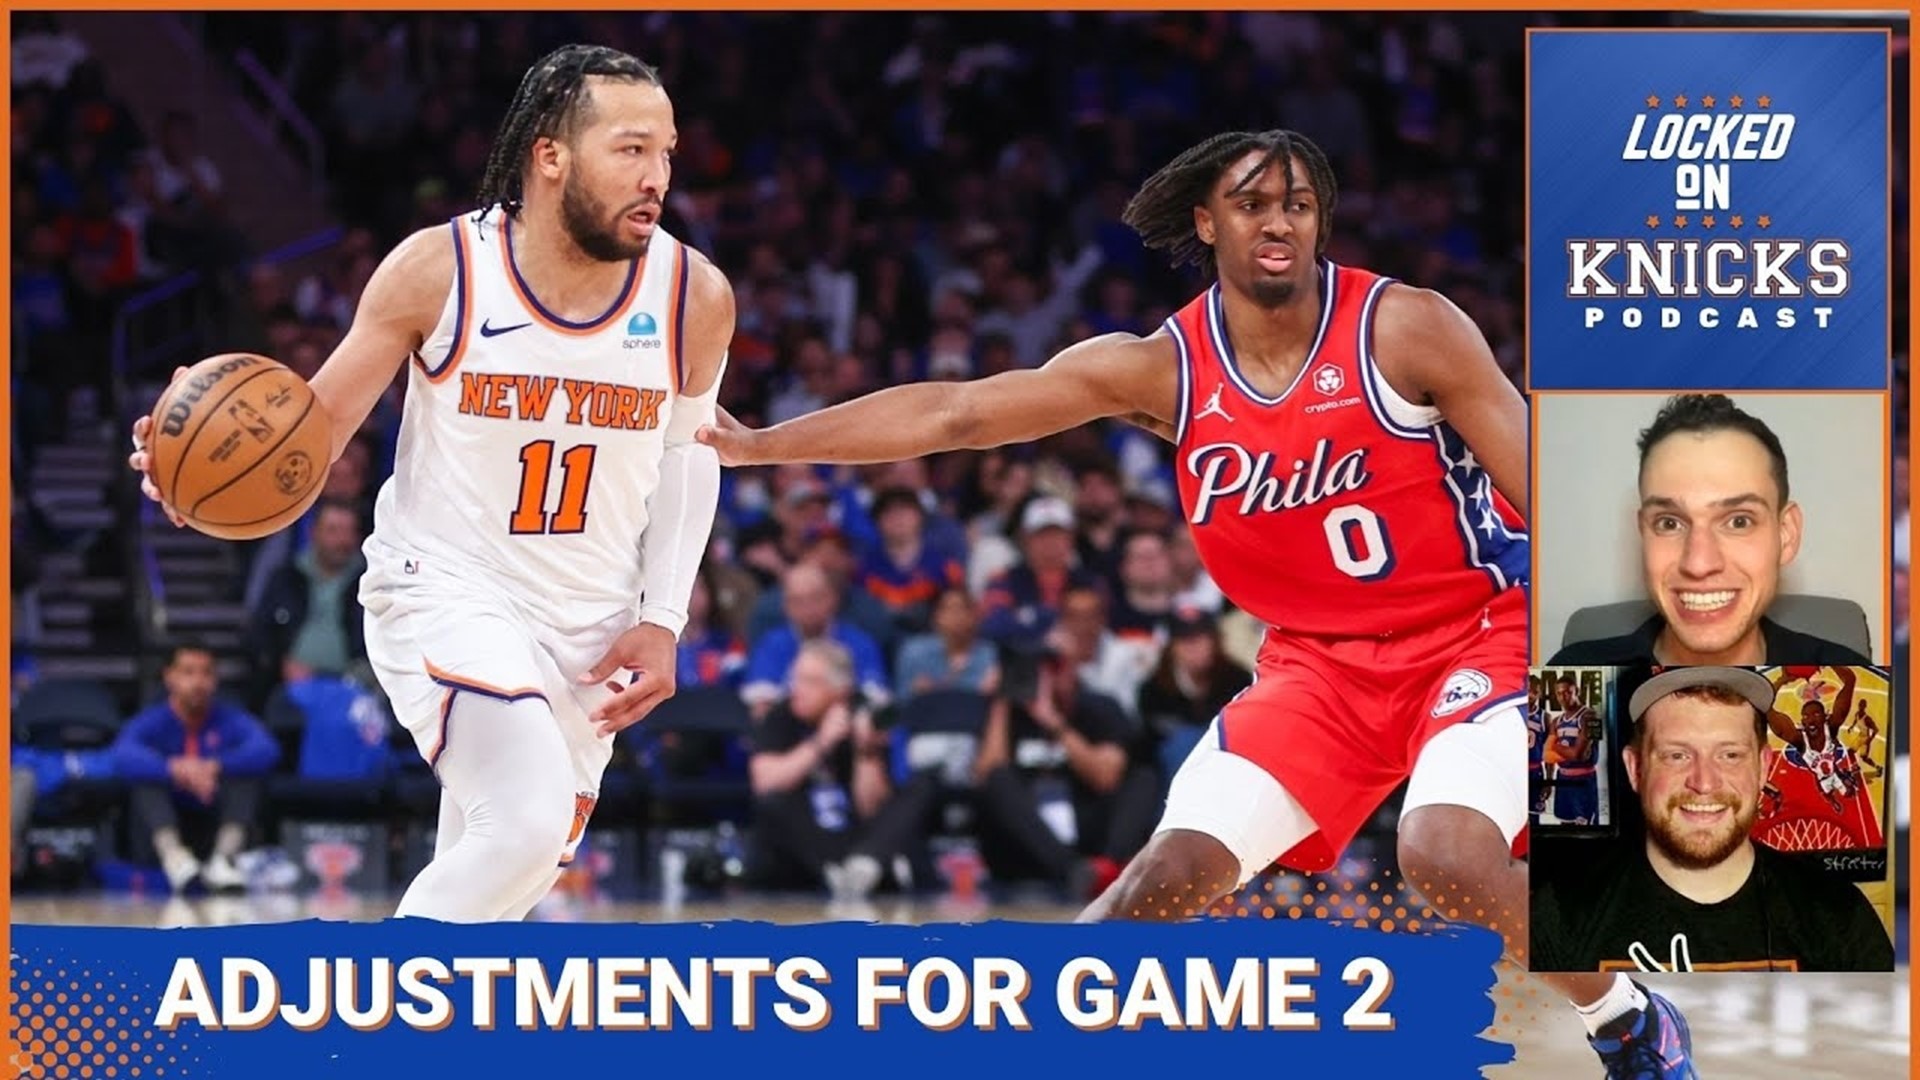 Should the Knicks start Mitchell Robinson to slow down Joel Embiid? What do they do with Tyrese Maxey?